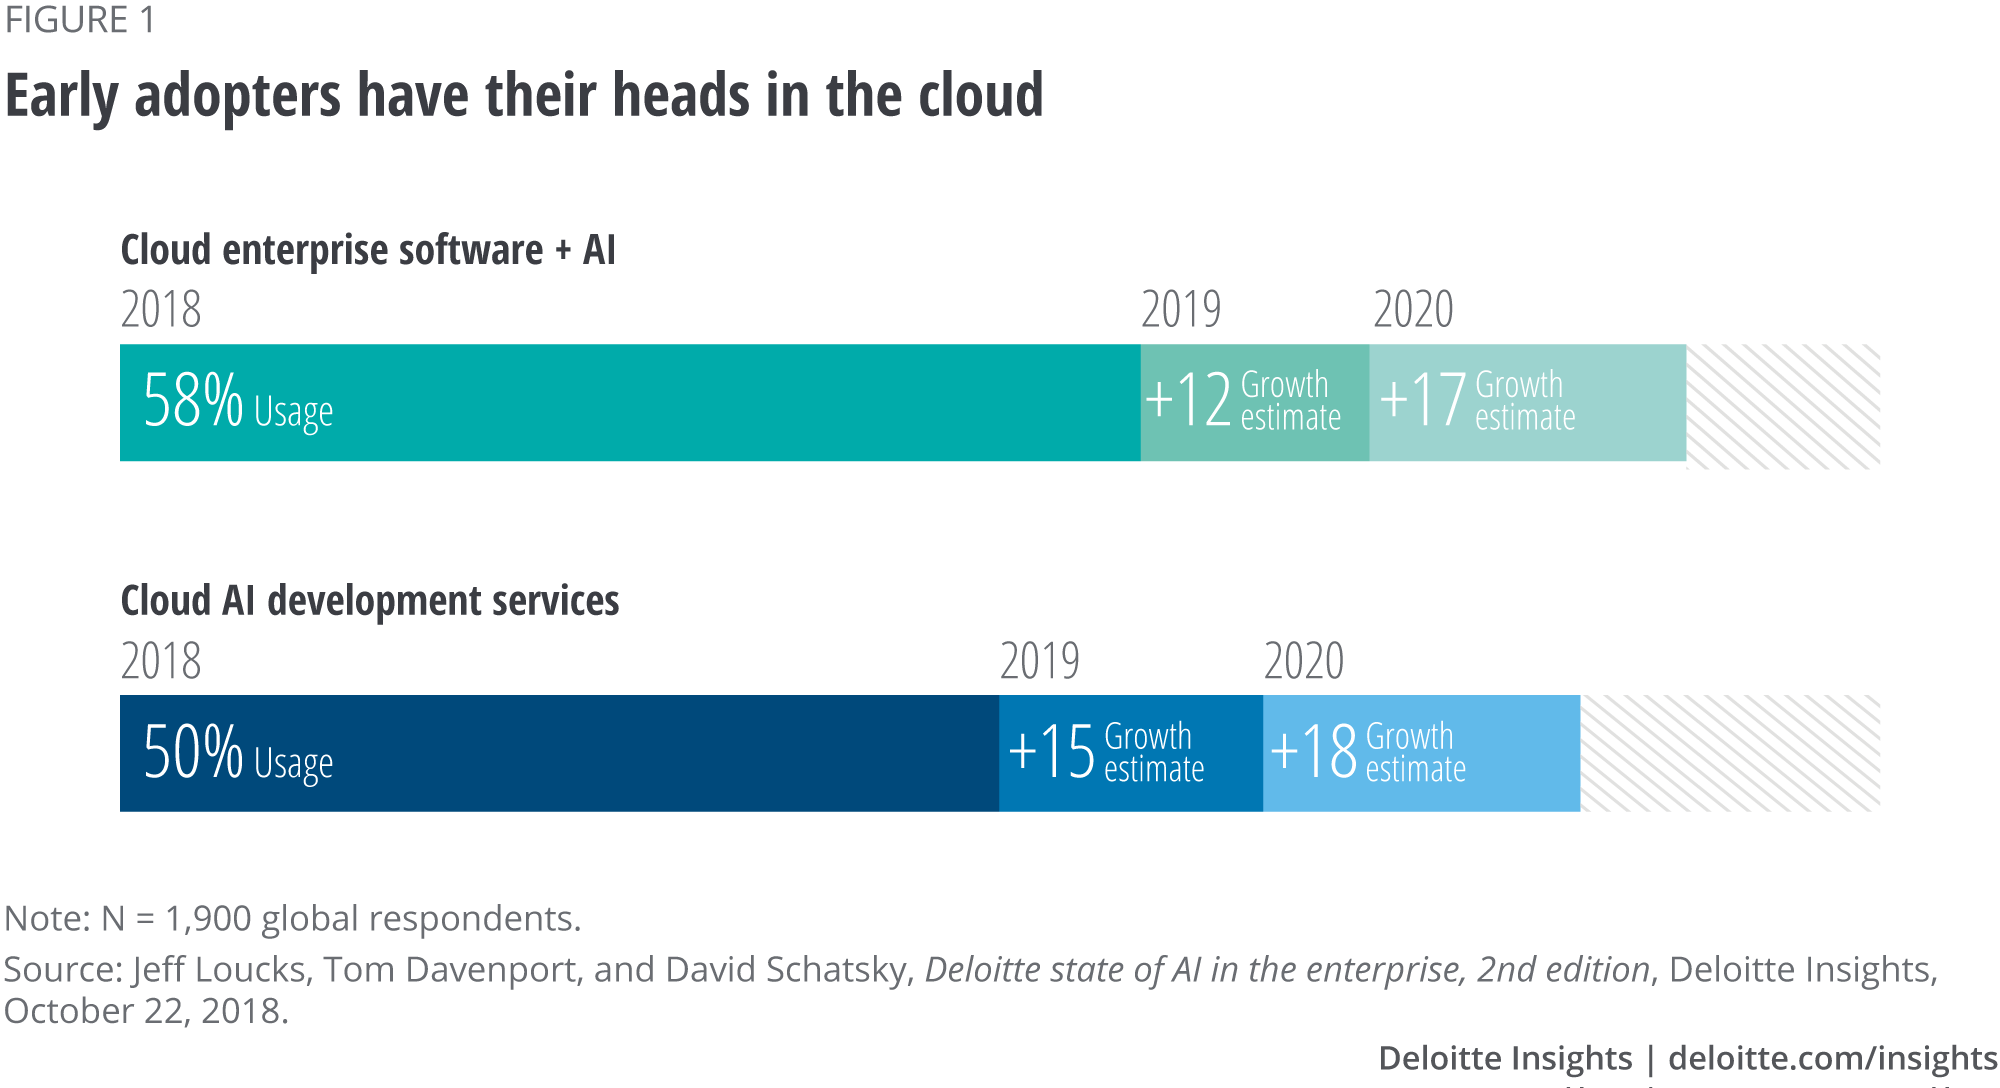 Early adopters have their heads in the cloud